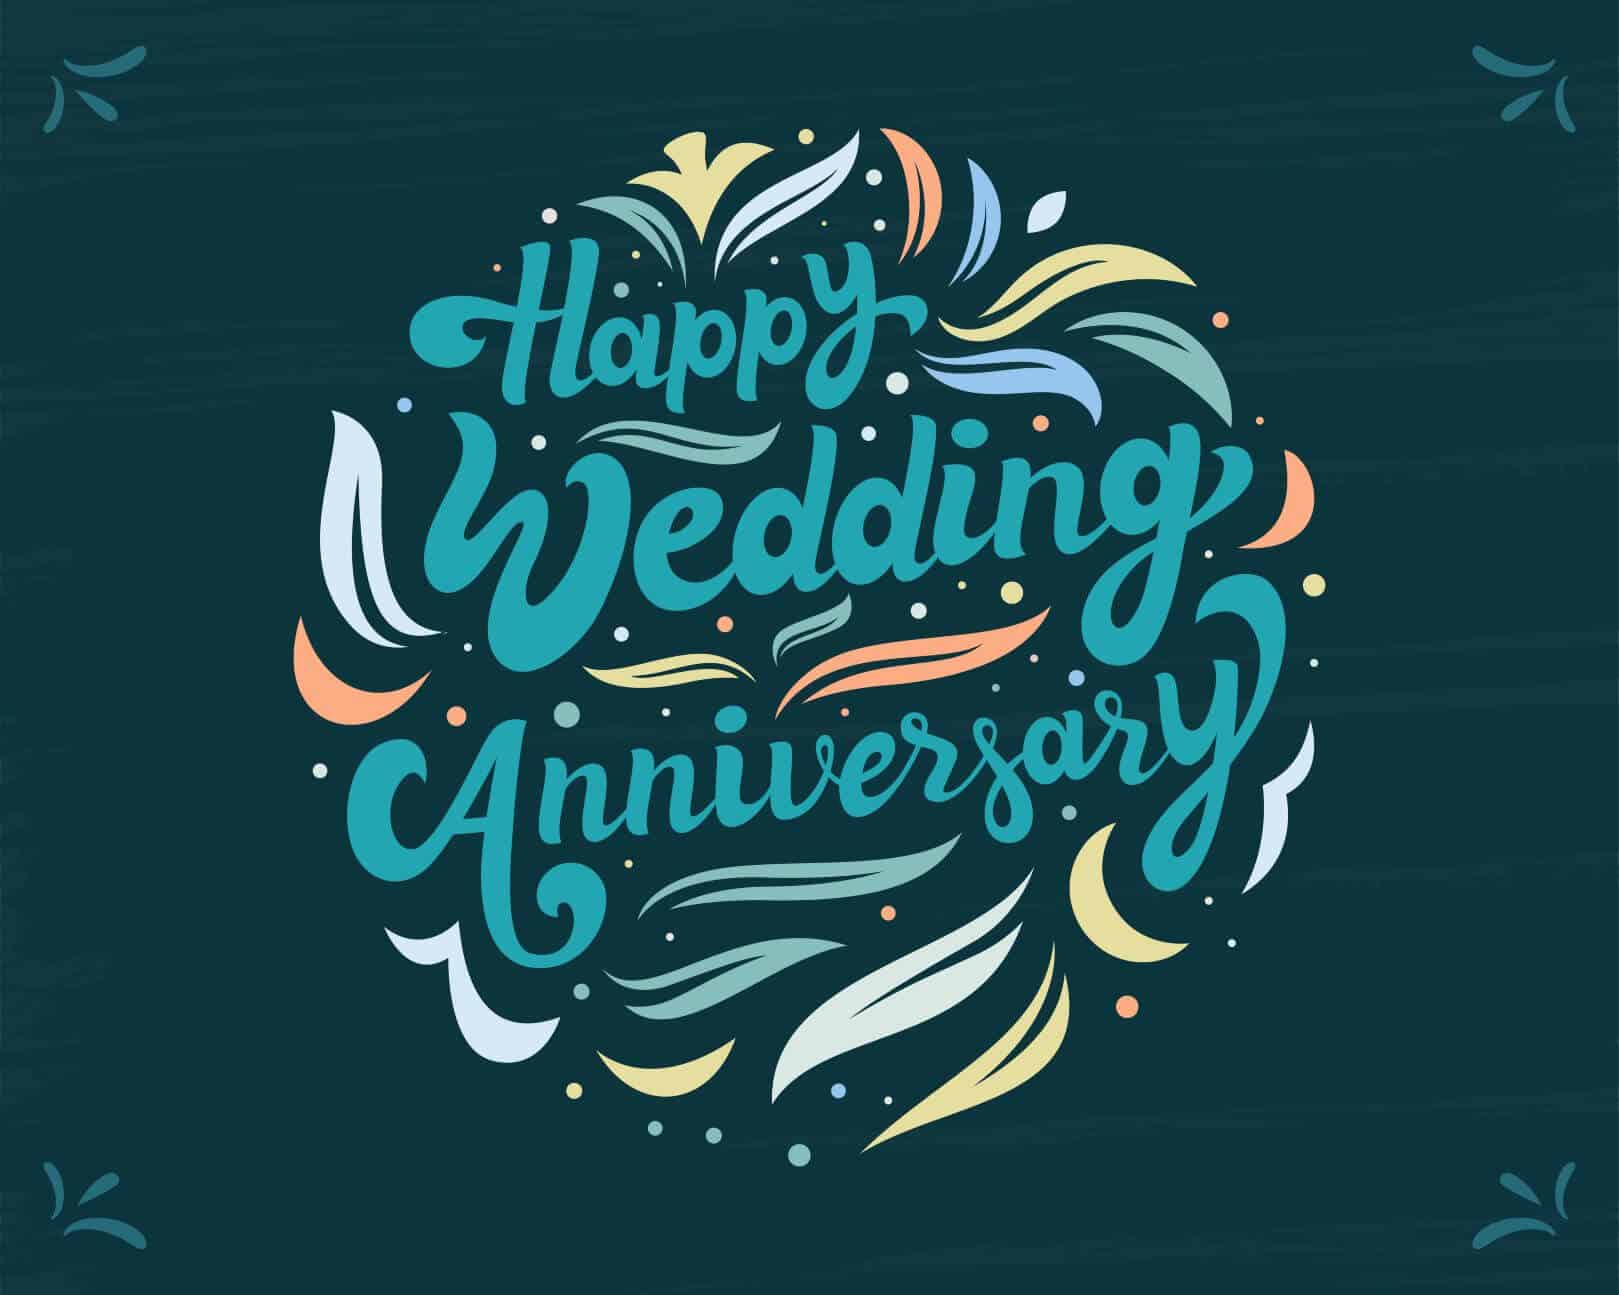 wedding-anniversary-wishes-what-to-write-in-a-heartfelt-card-the